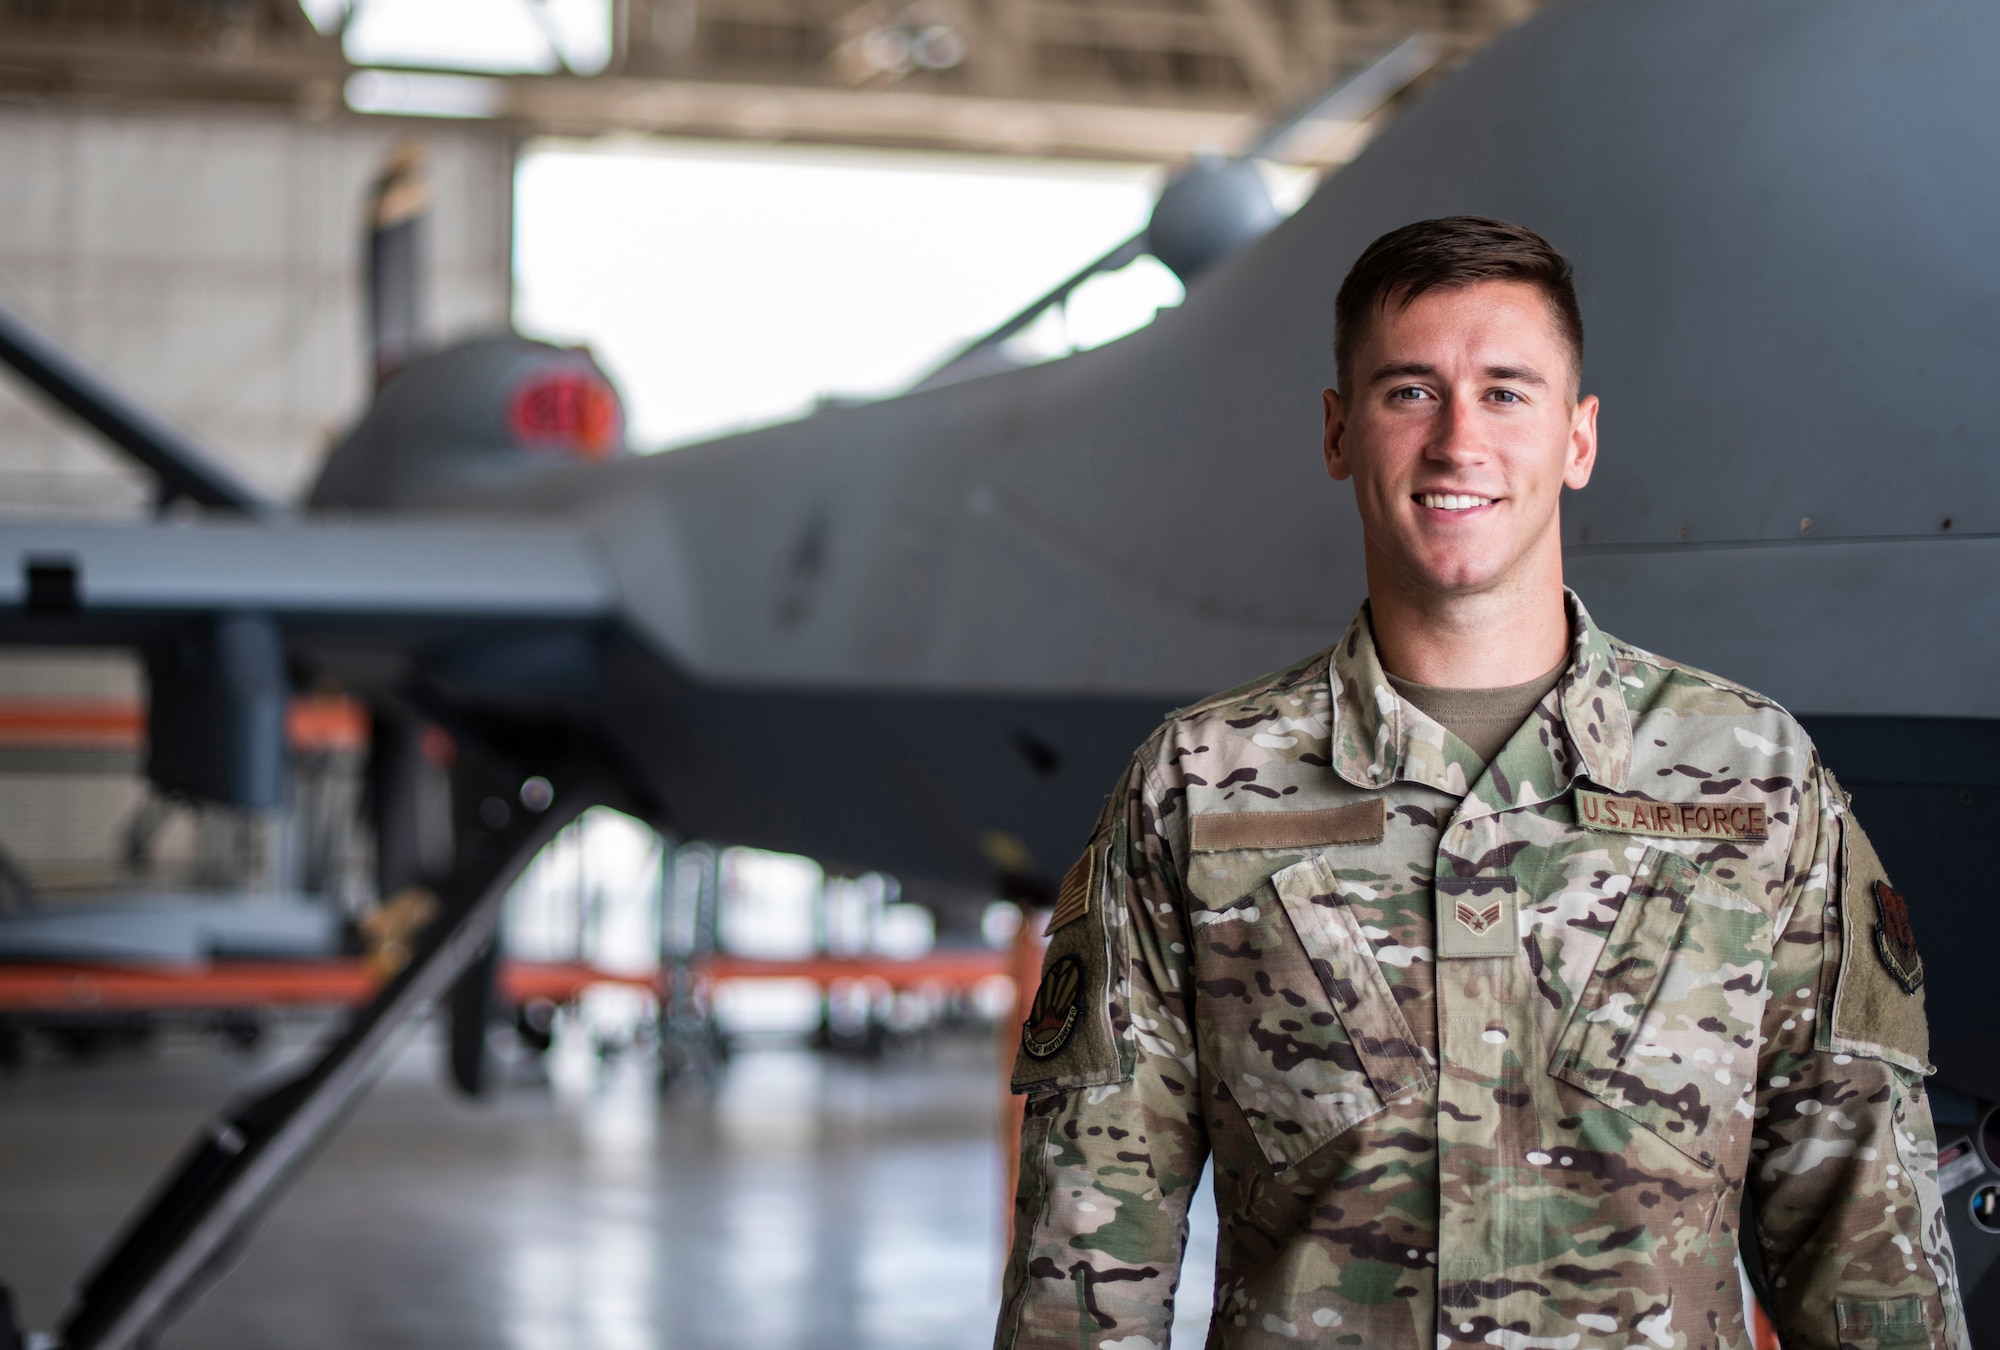 Senior Airman Levi stands to the side of an MQ-9 Reaper and smiles for a photo.